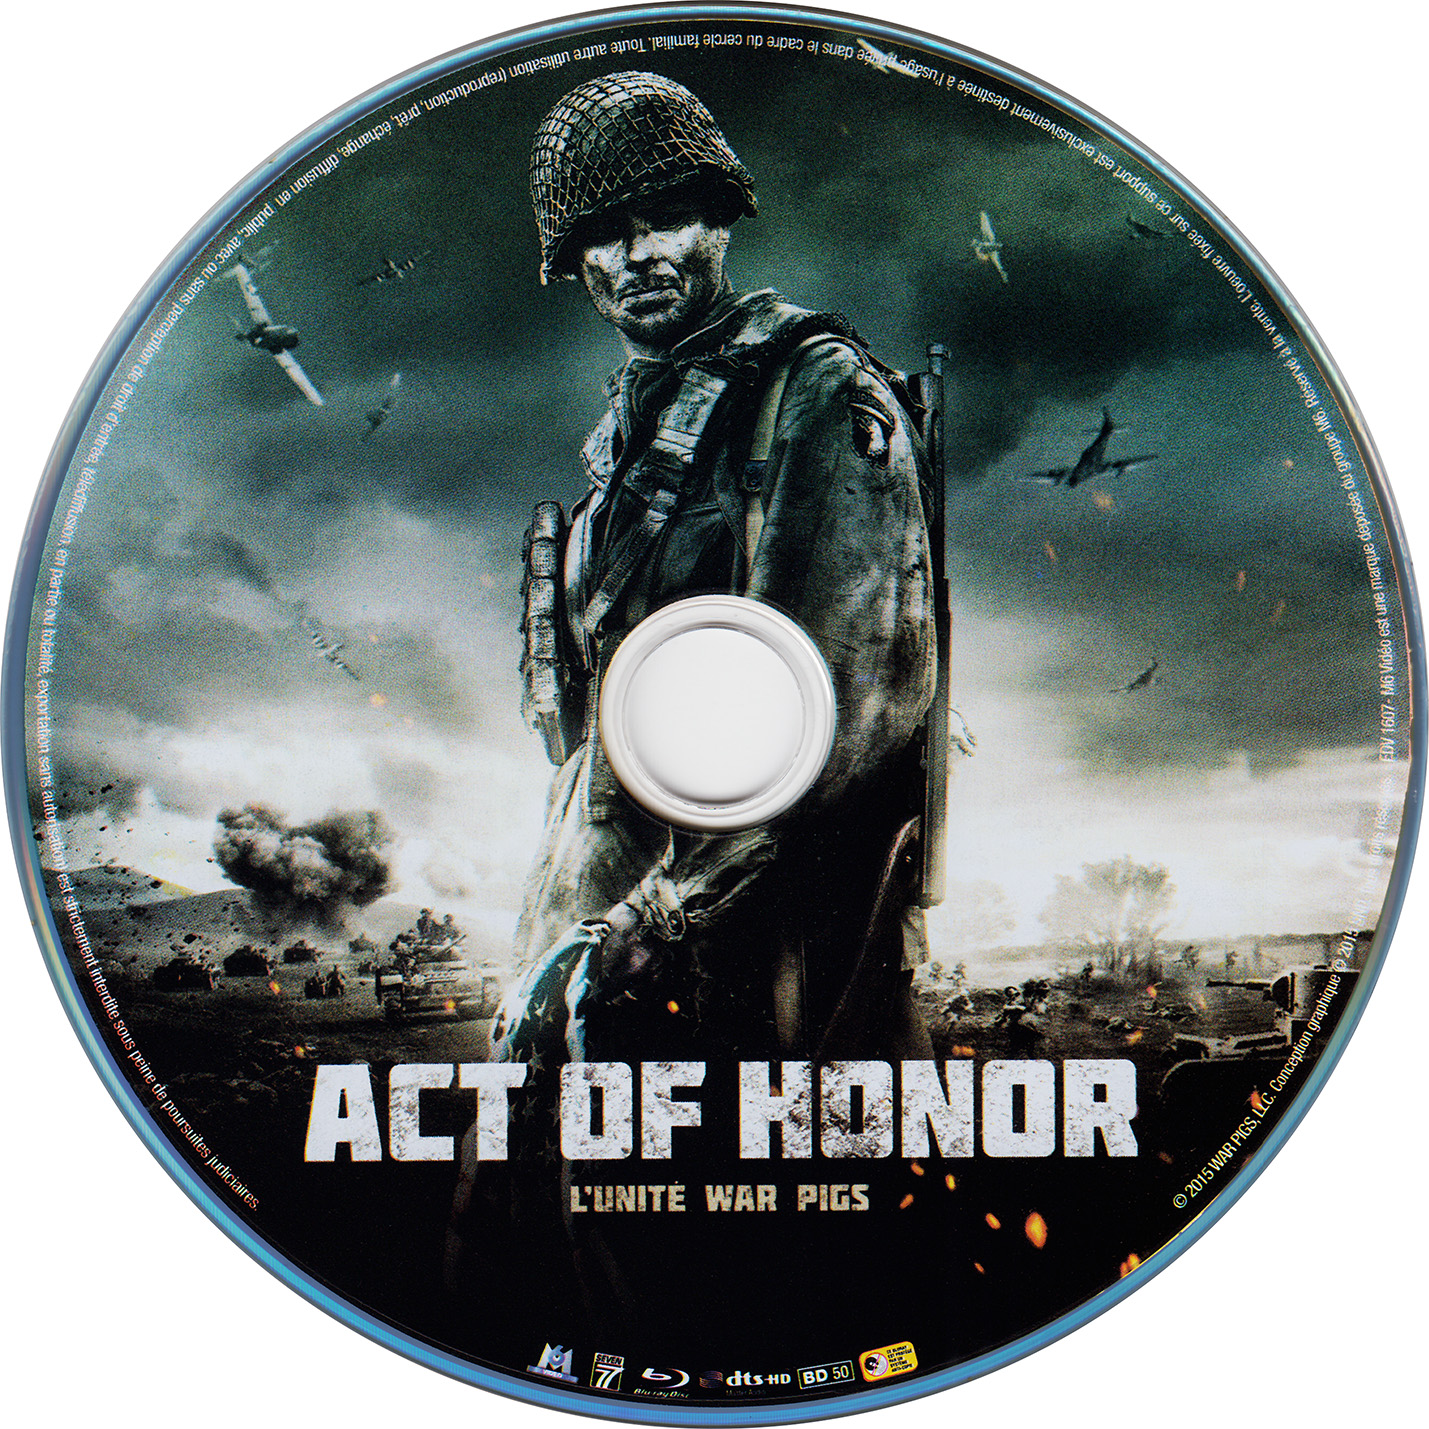 Act of honor (BLU-RAY)